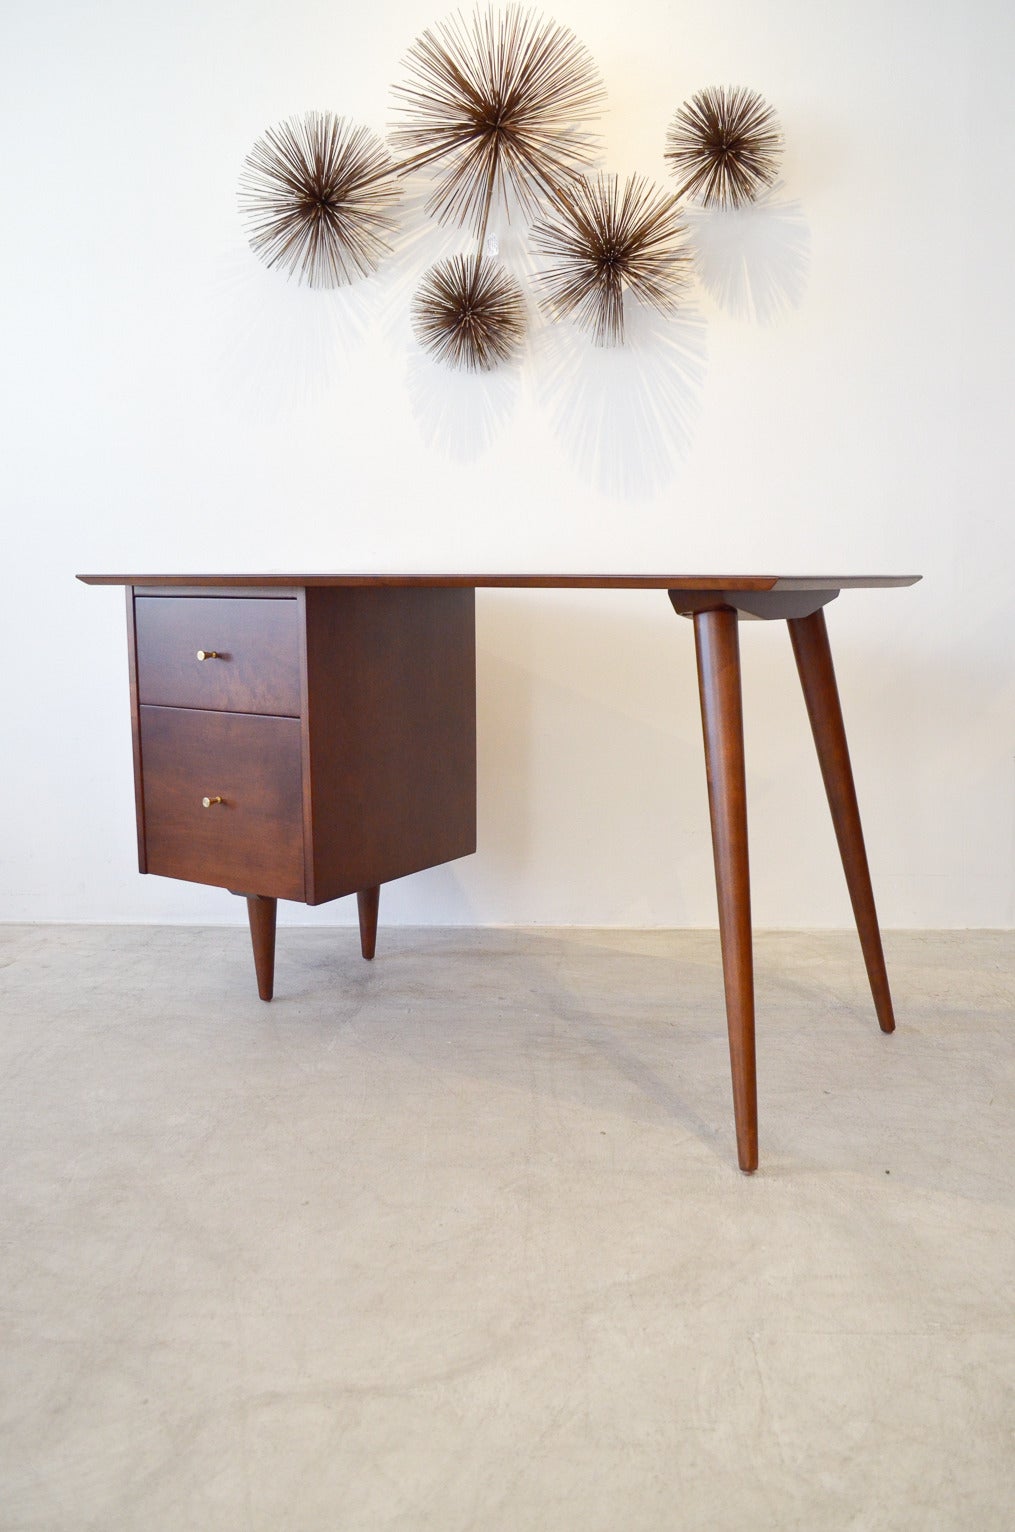 This Planner Group desk is Classic, iconic, simple. Amazing design describes this desk is designed by Paul McCobb for Winchendon Furniture Company. Professionally restored with walnut finish and in showroom perfect condition.

Beautiful, finish